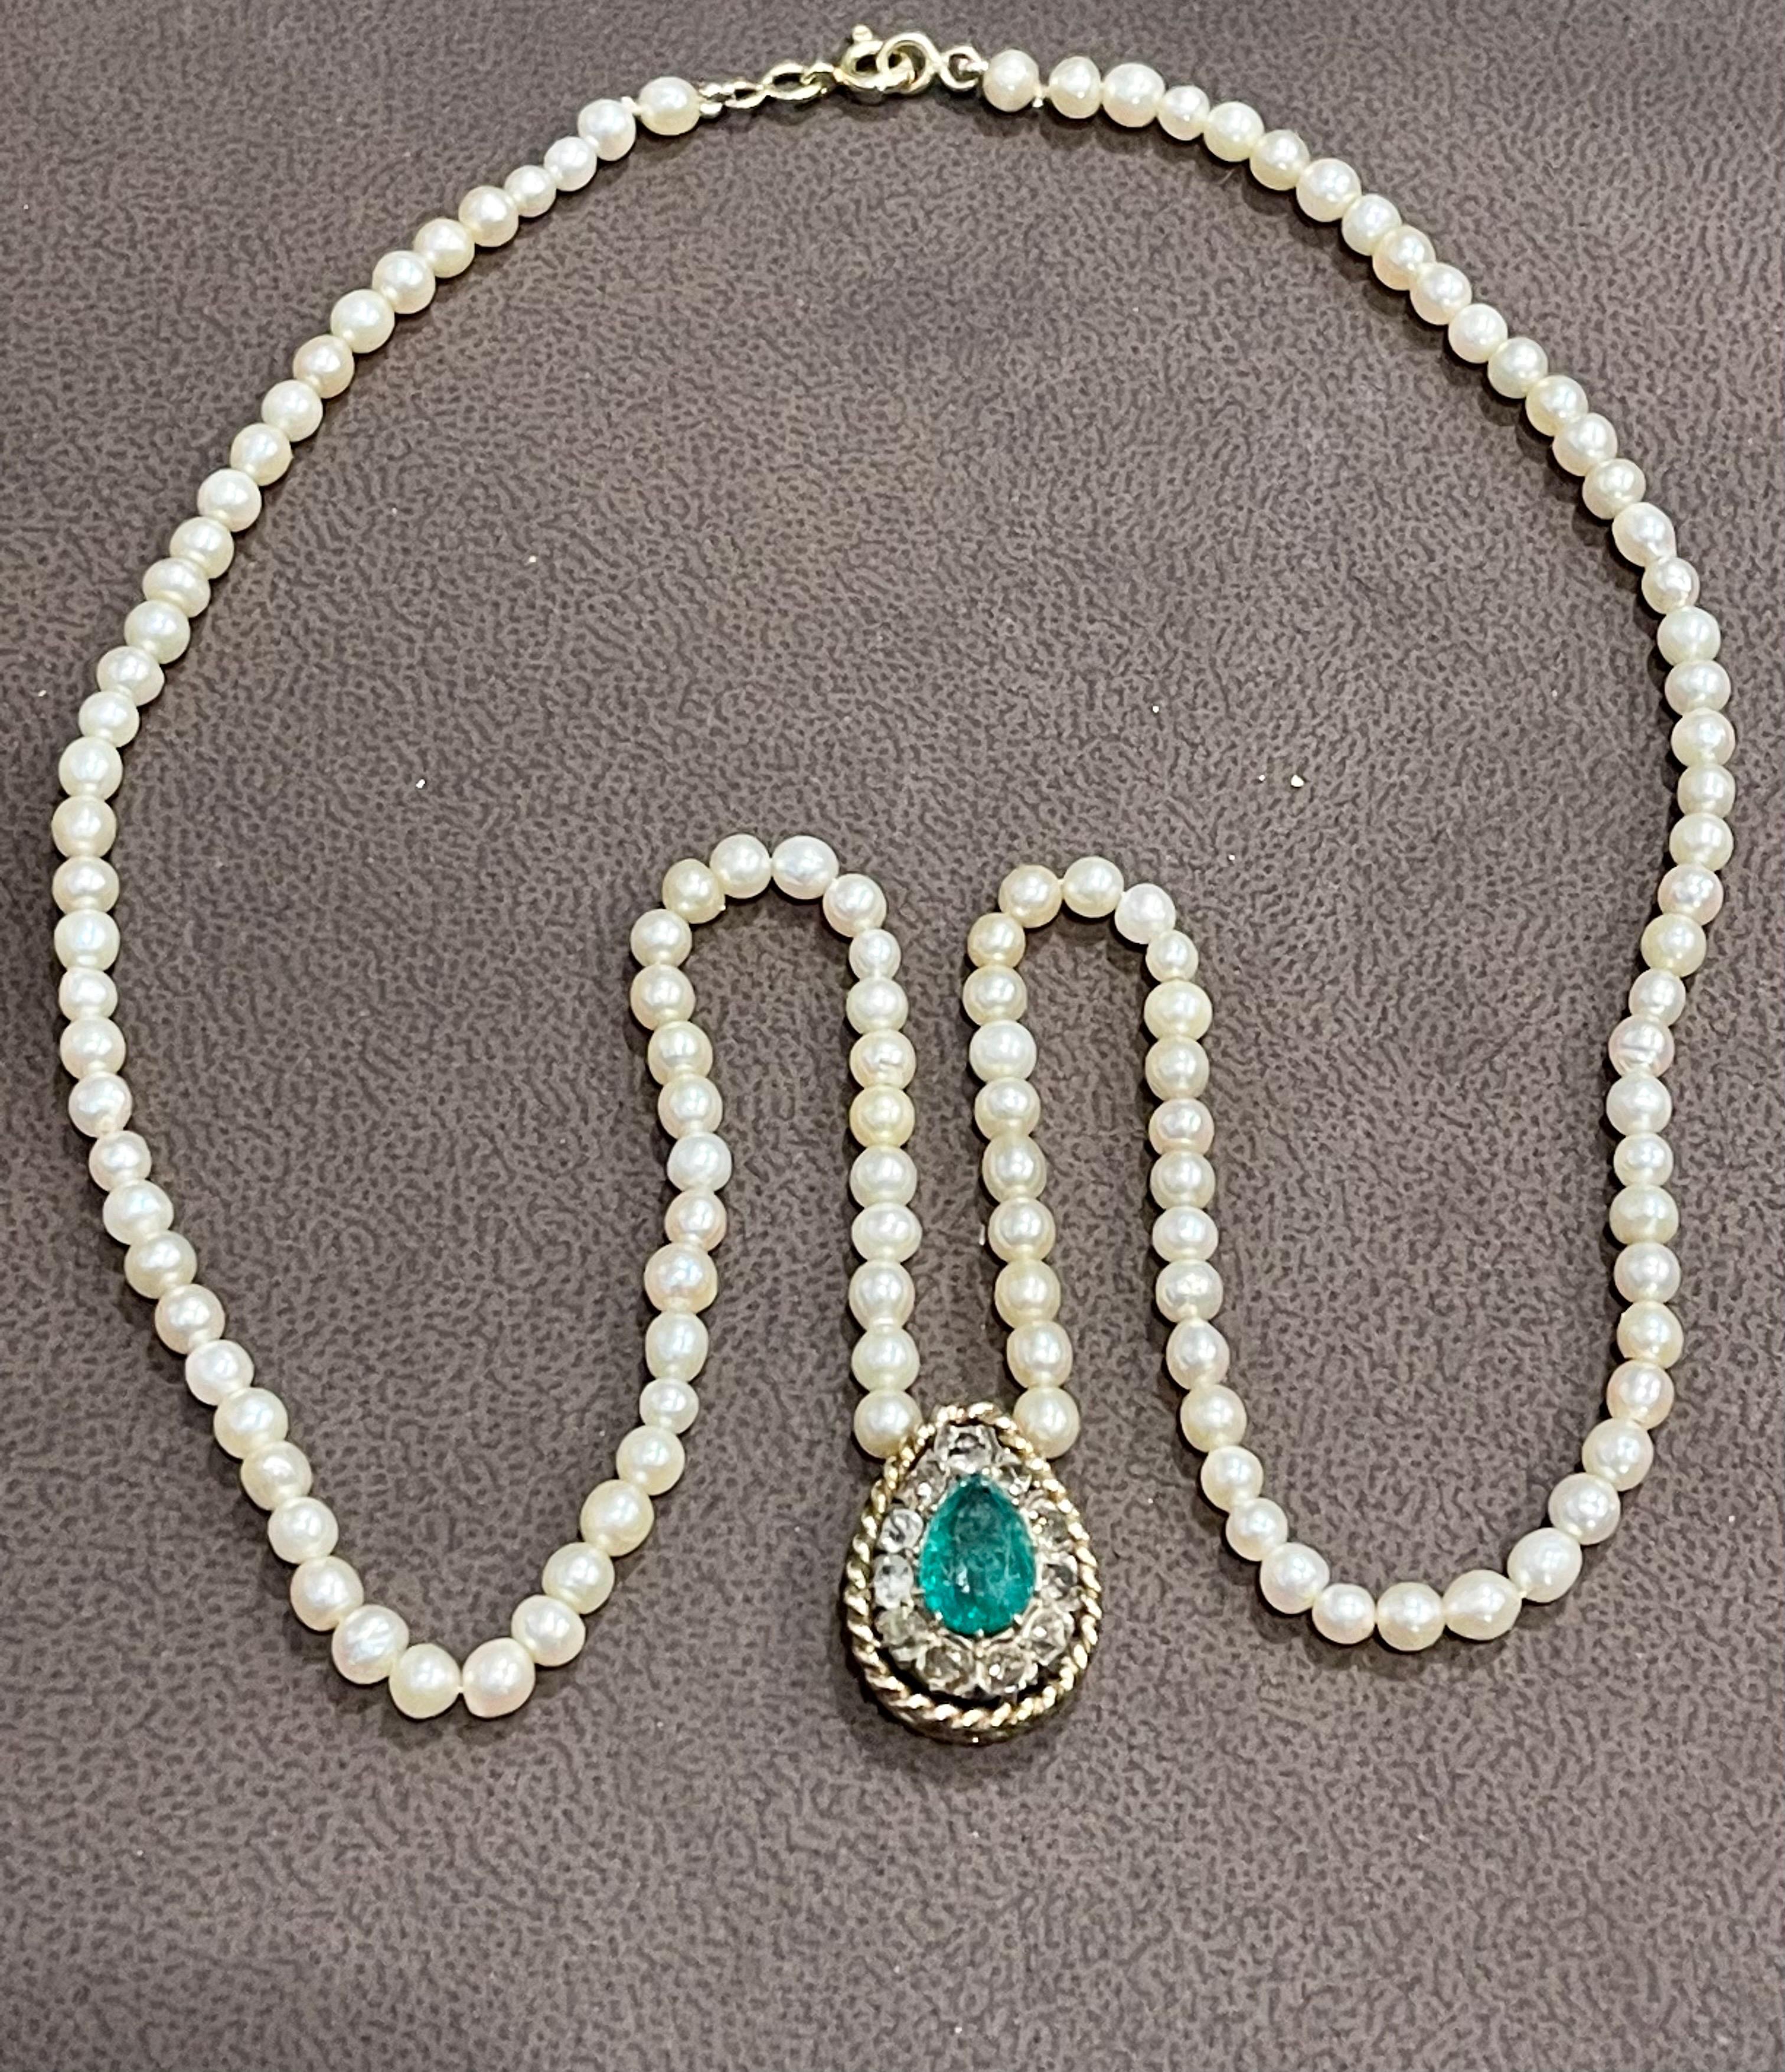 120 Years Old GIA Certified Natural Basra Pearls & Emerald Necklace 14KY Gold For Sale 1